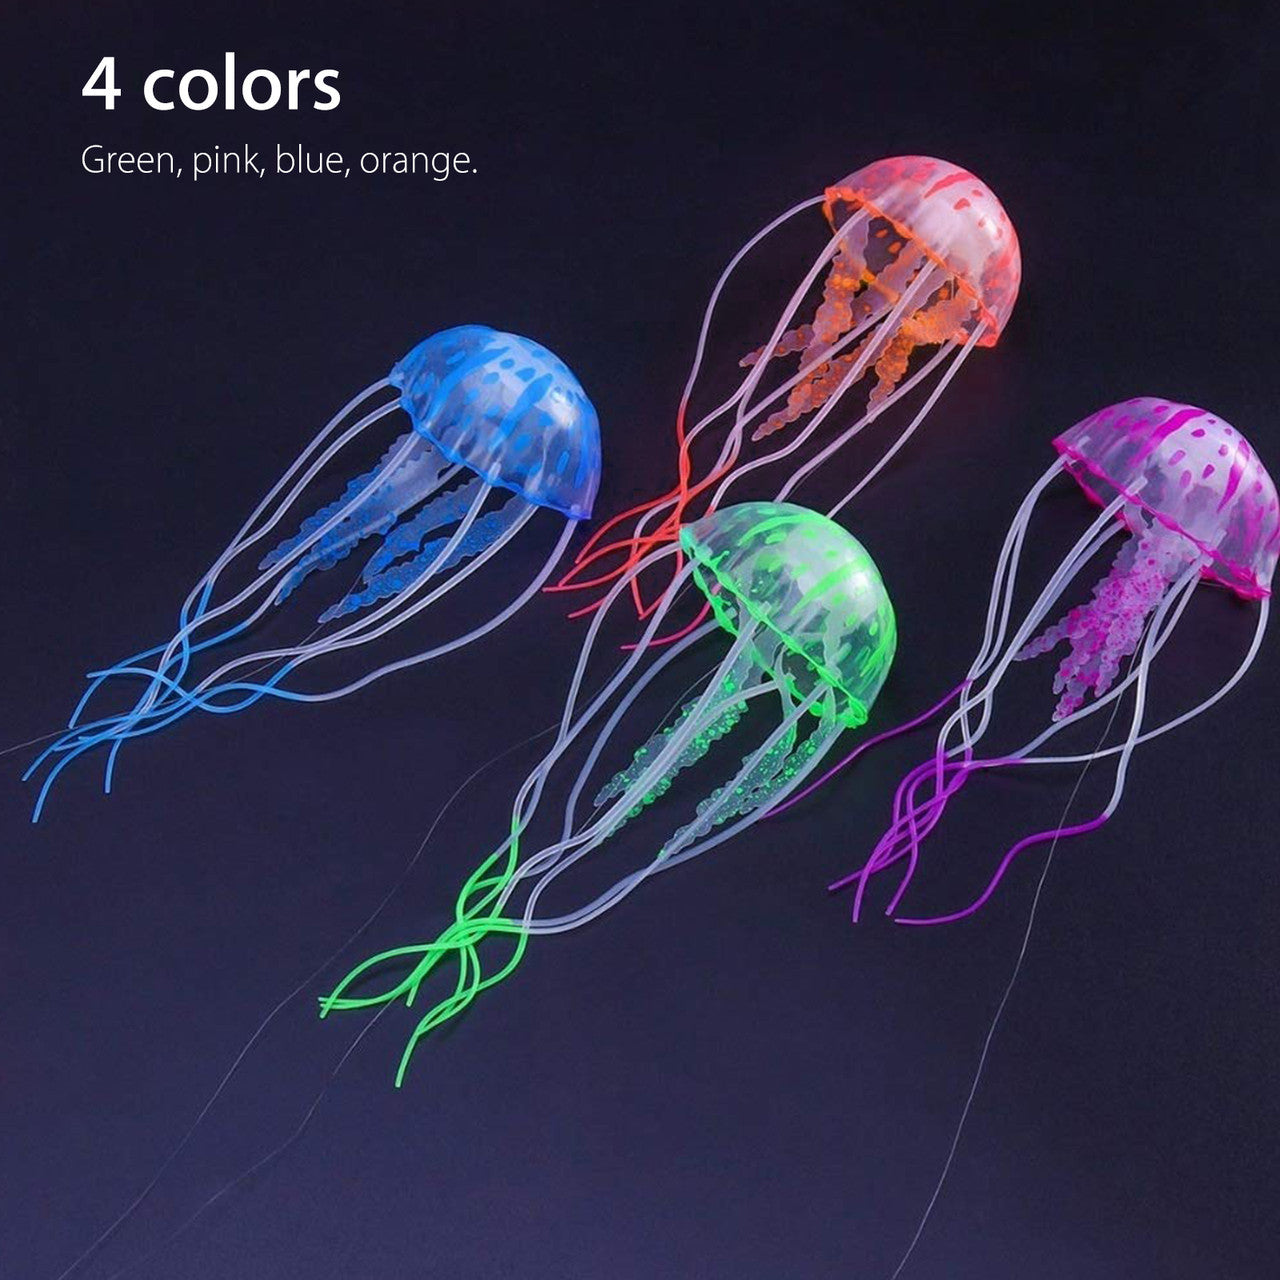 Glowing Effect Artificial Jellyfish Ornament for Fish Tank Aquarium Decoration, Safe for Fish,Instant Suction Cup Installation, 4-pack